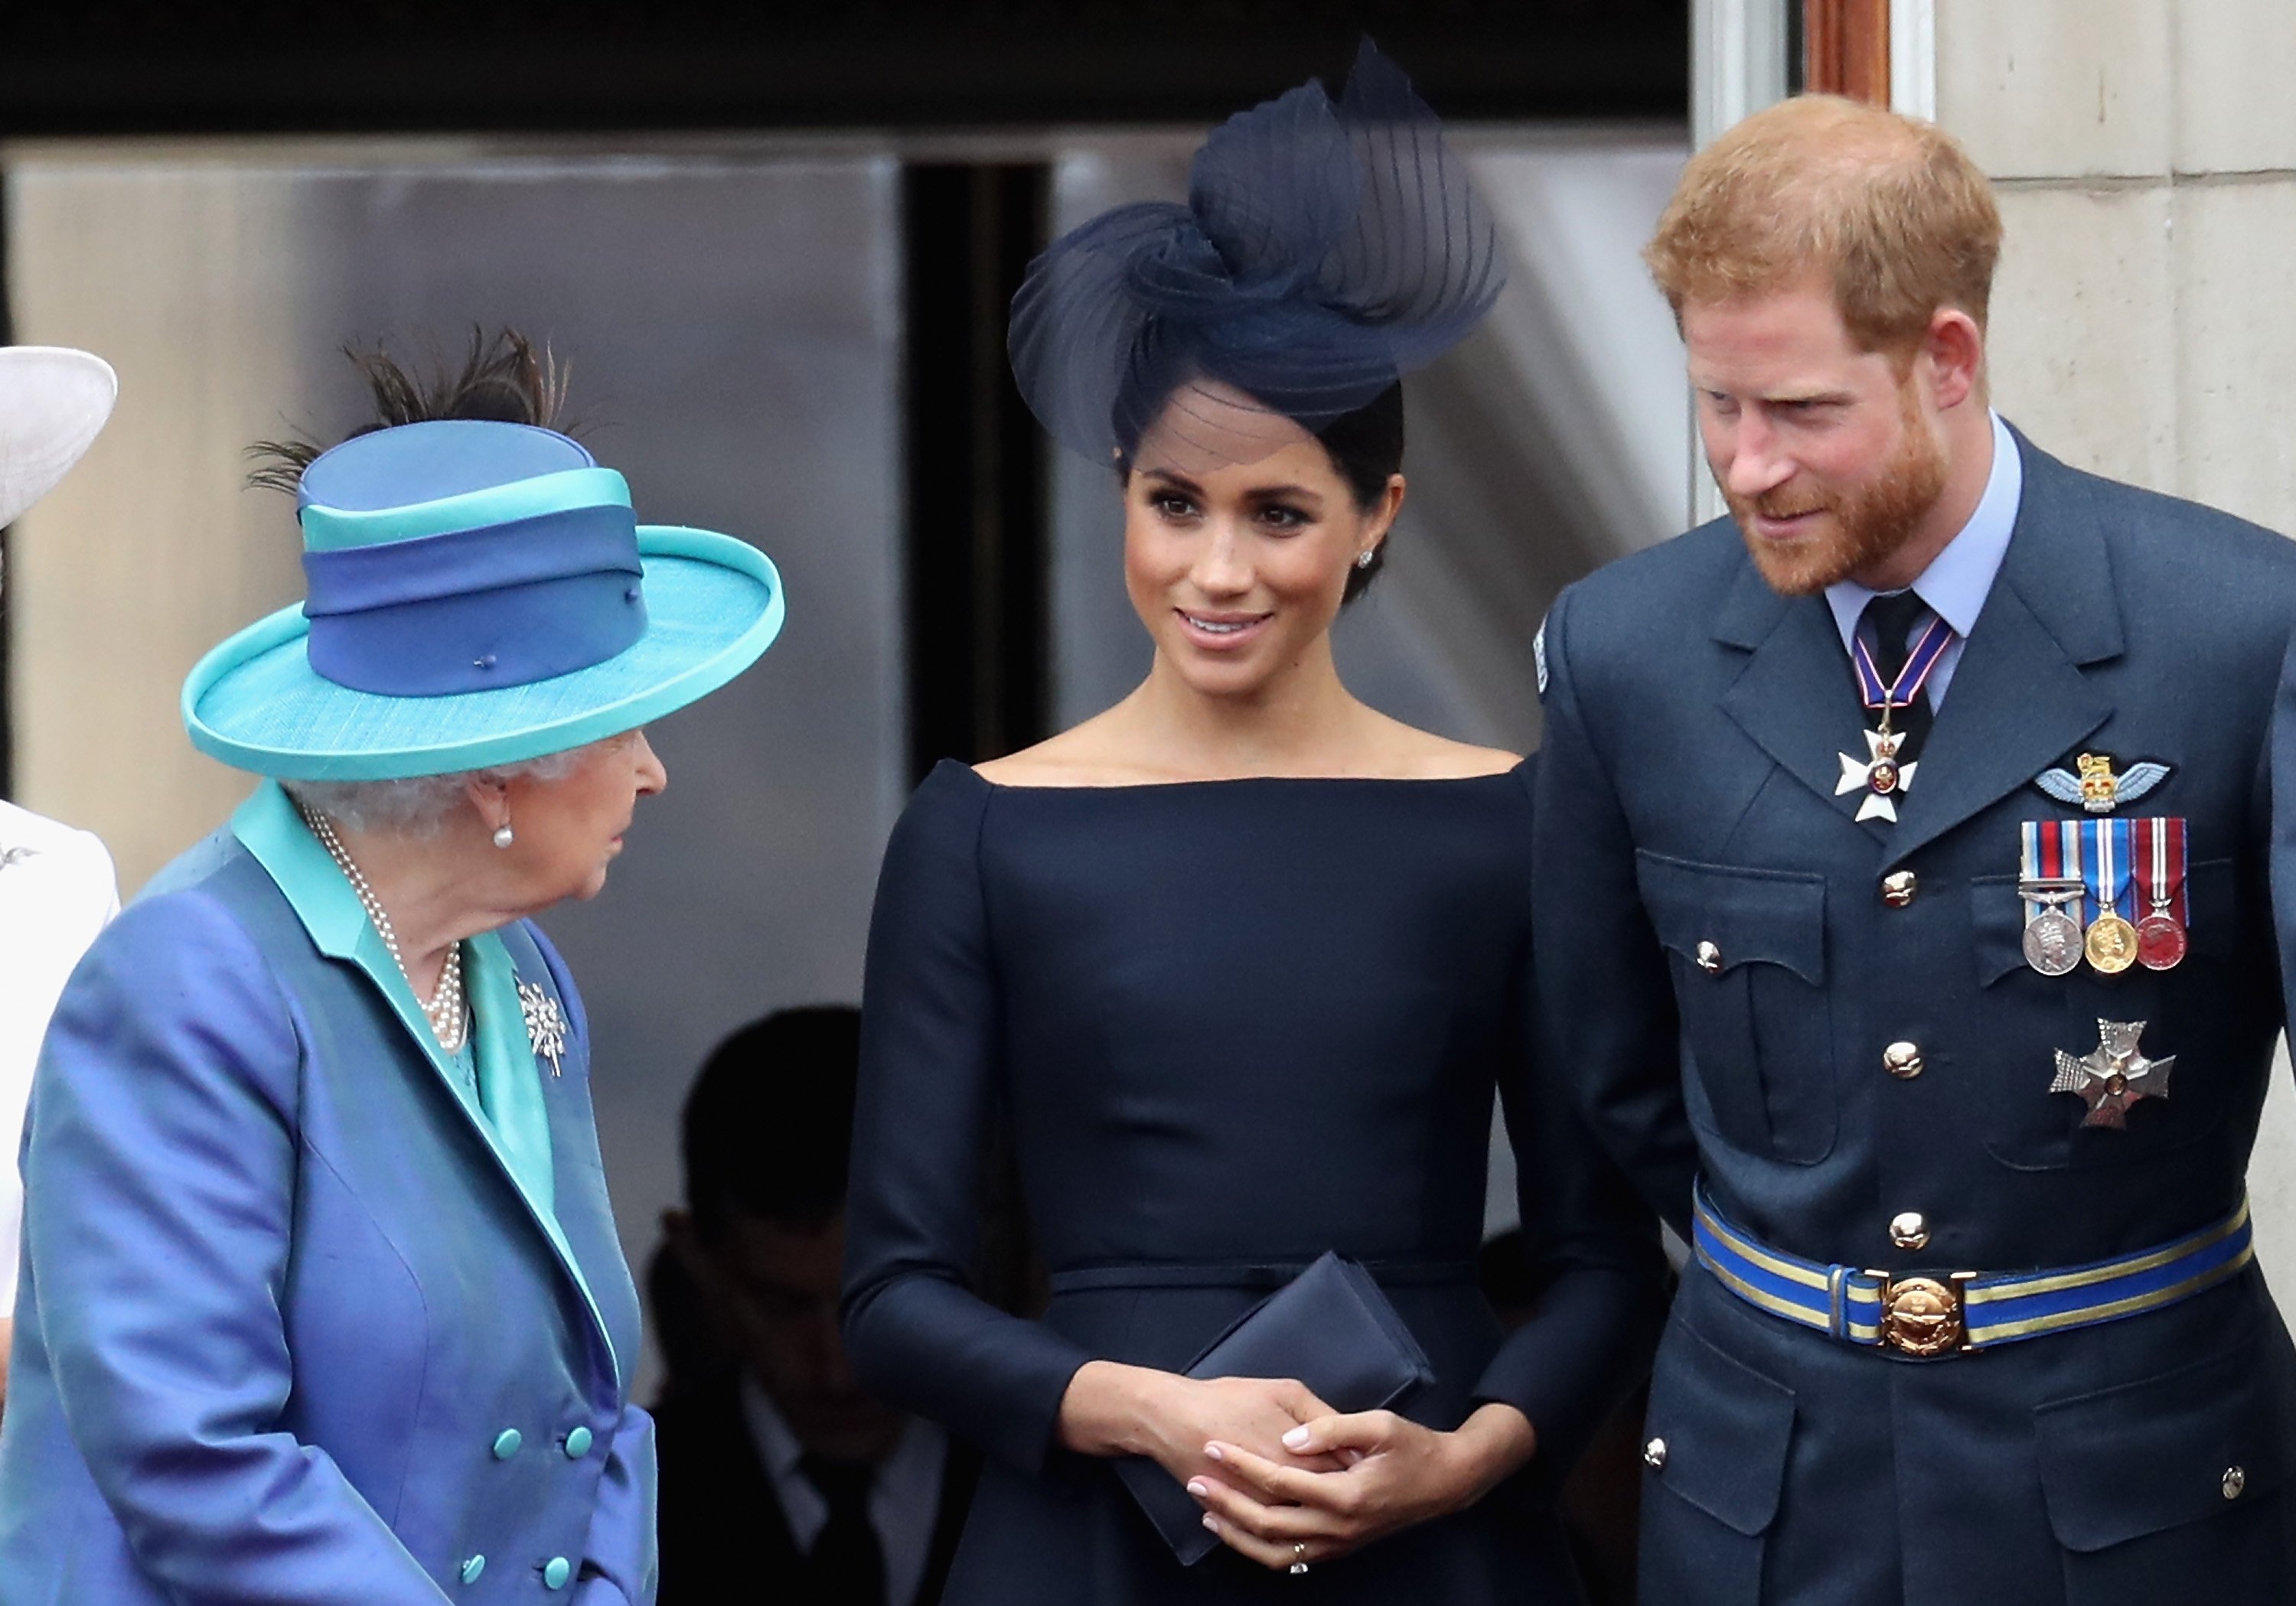 Queen Elizabeth II, Meghan Markle and Prince Harry pictured watching the RAF flypast on the balcony of Buckingham Palace on July 10, 2018 in London, England. │ Source: Getty Images